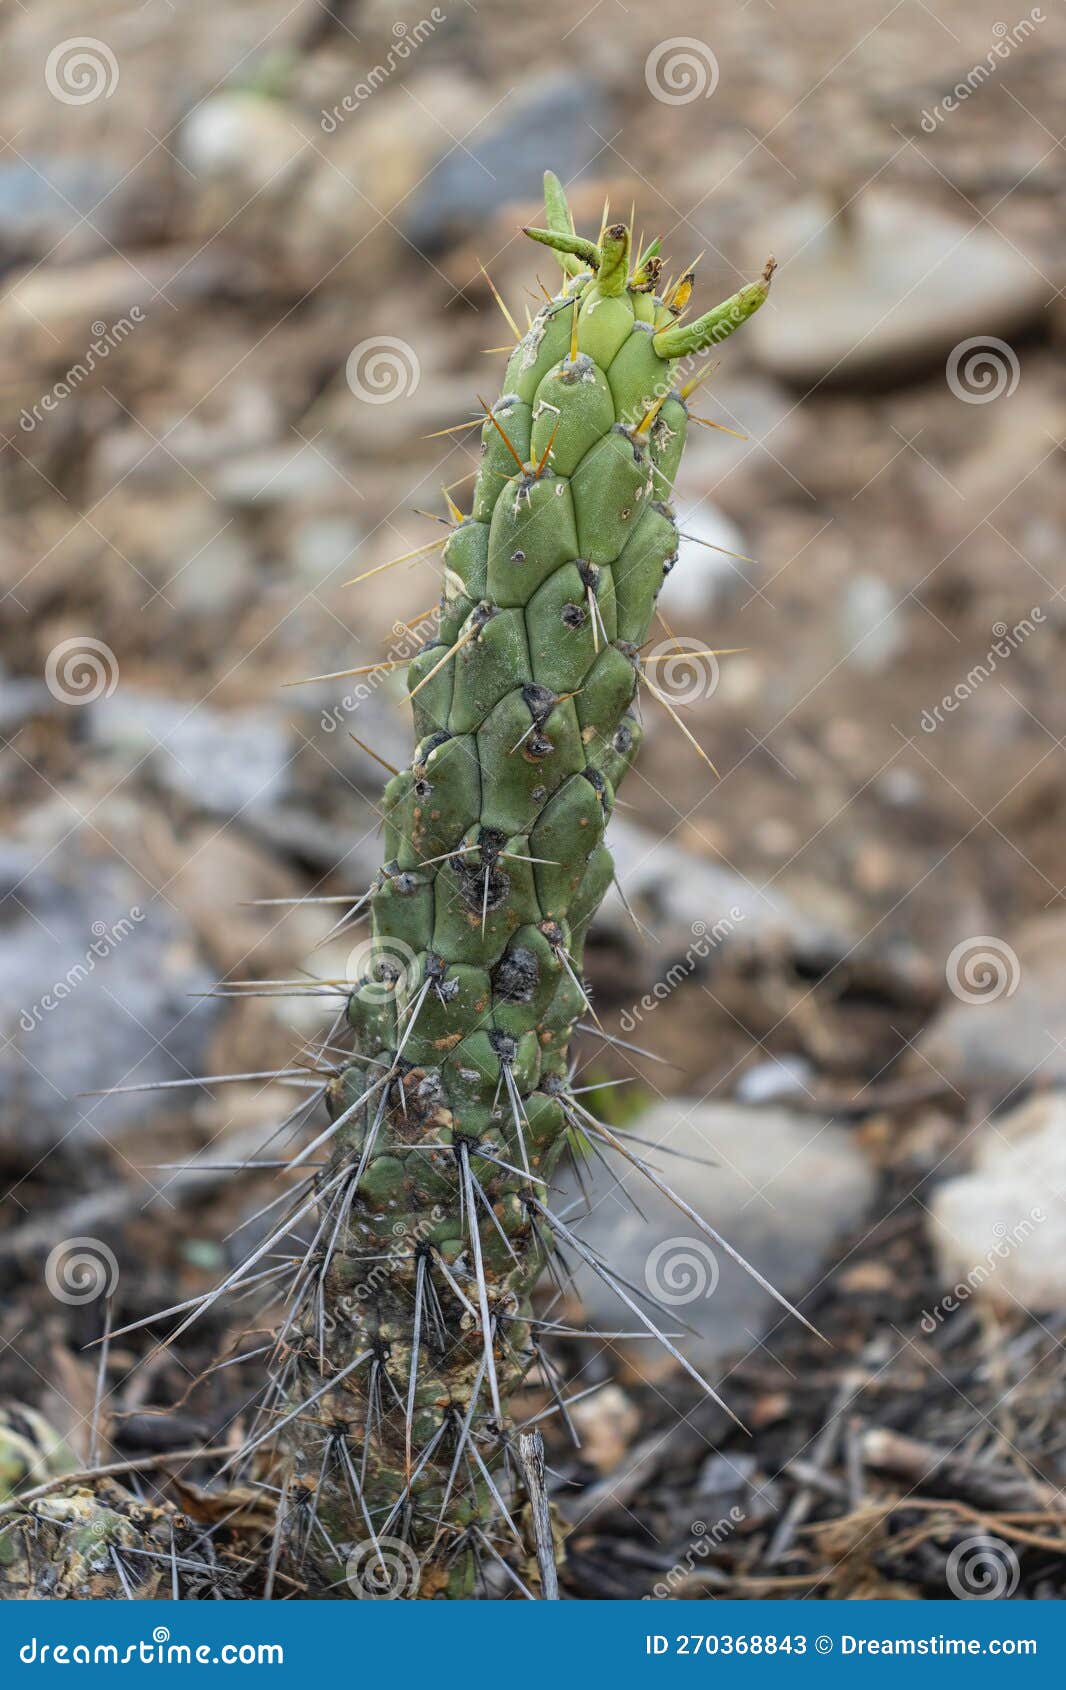 cactus plant known as palo de espinas or as species opuntia cylindrica (lam.) dc. belongs to the plant family cactaceae